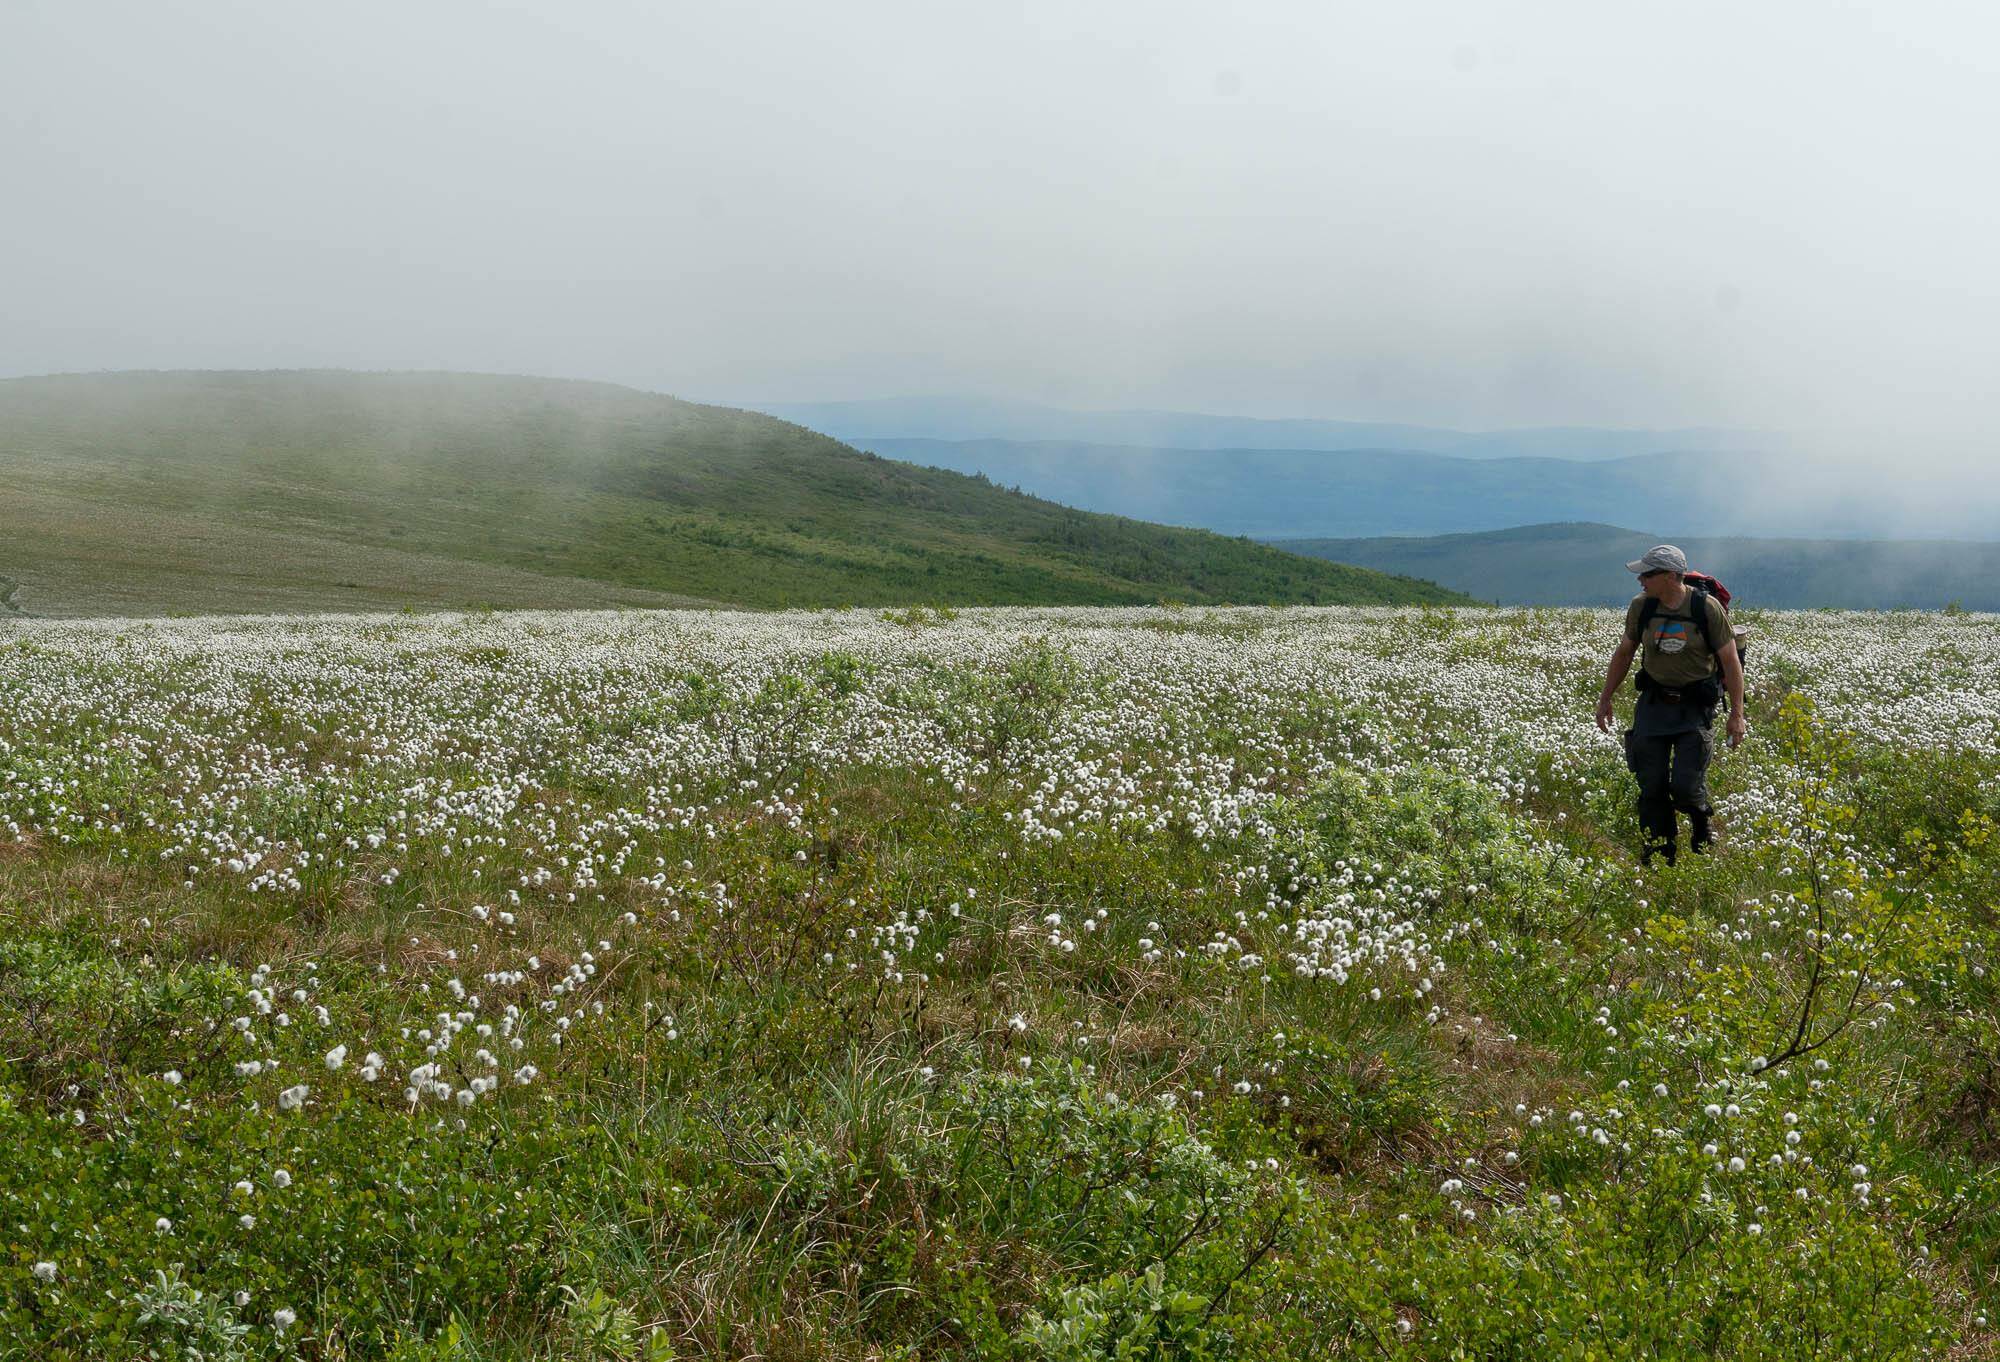 Alaska cotton refers to several species of cotton grass that grow in Alaska’s boggy areas, like the one Ned Rozell walks through here. (Courtesy Photo / Jay Cable)